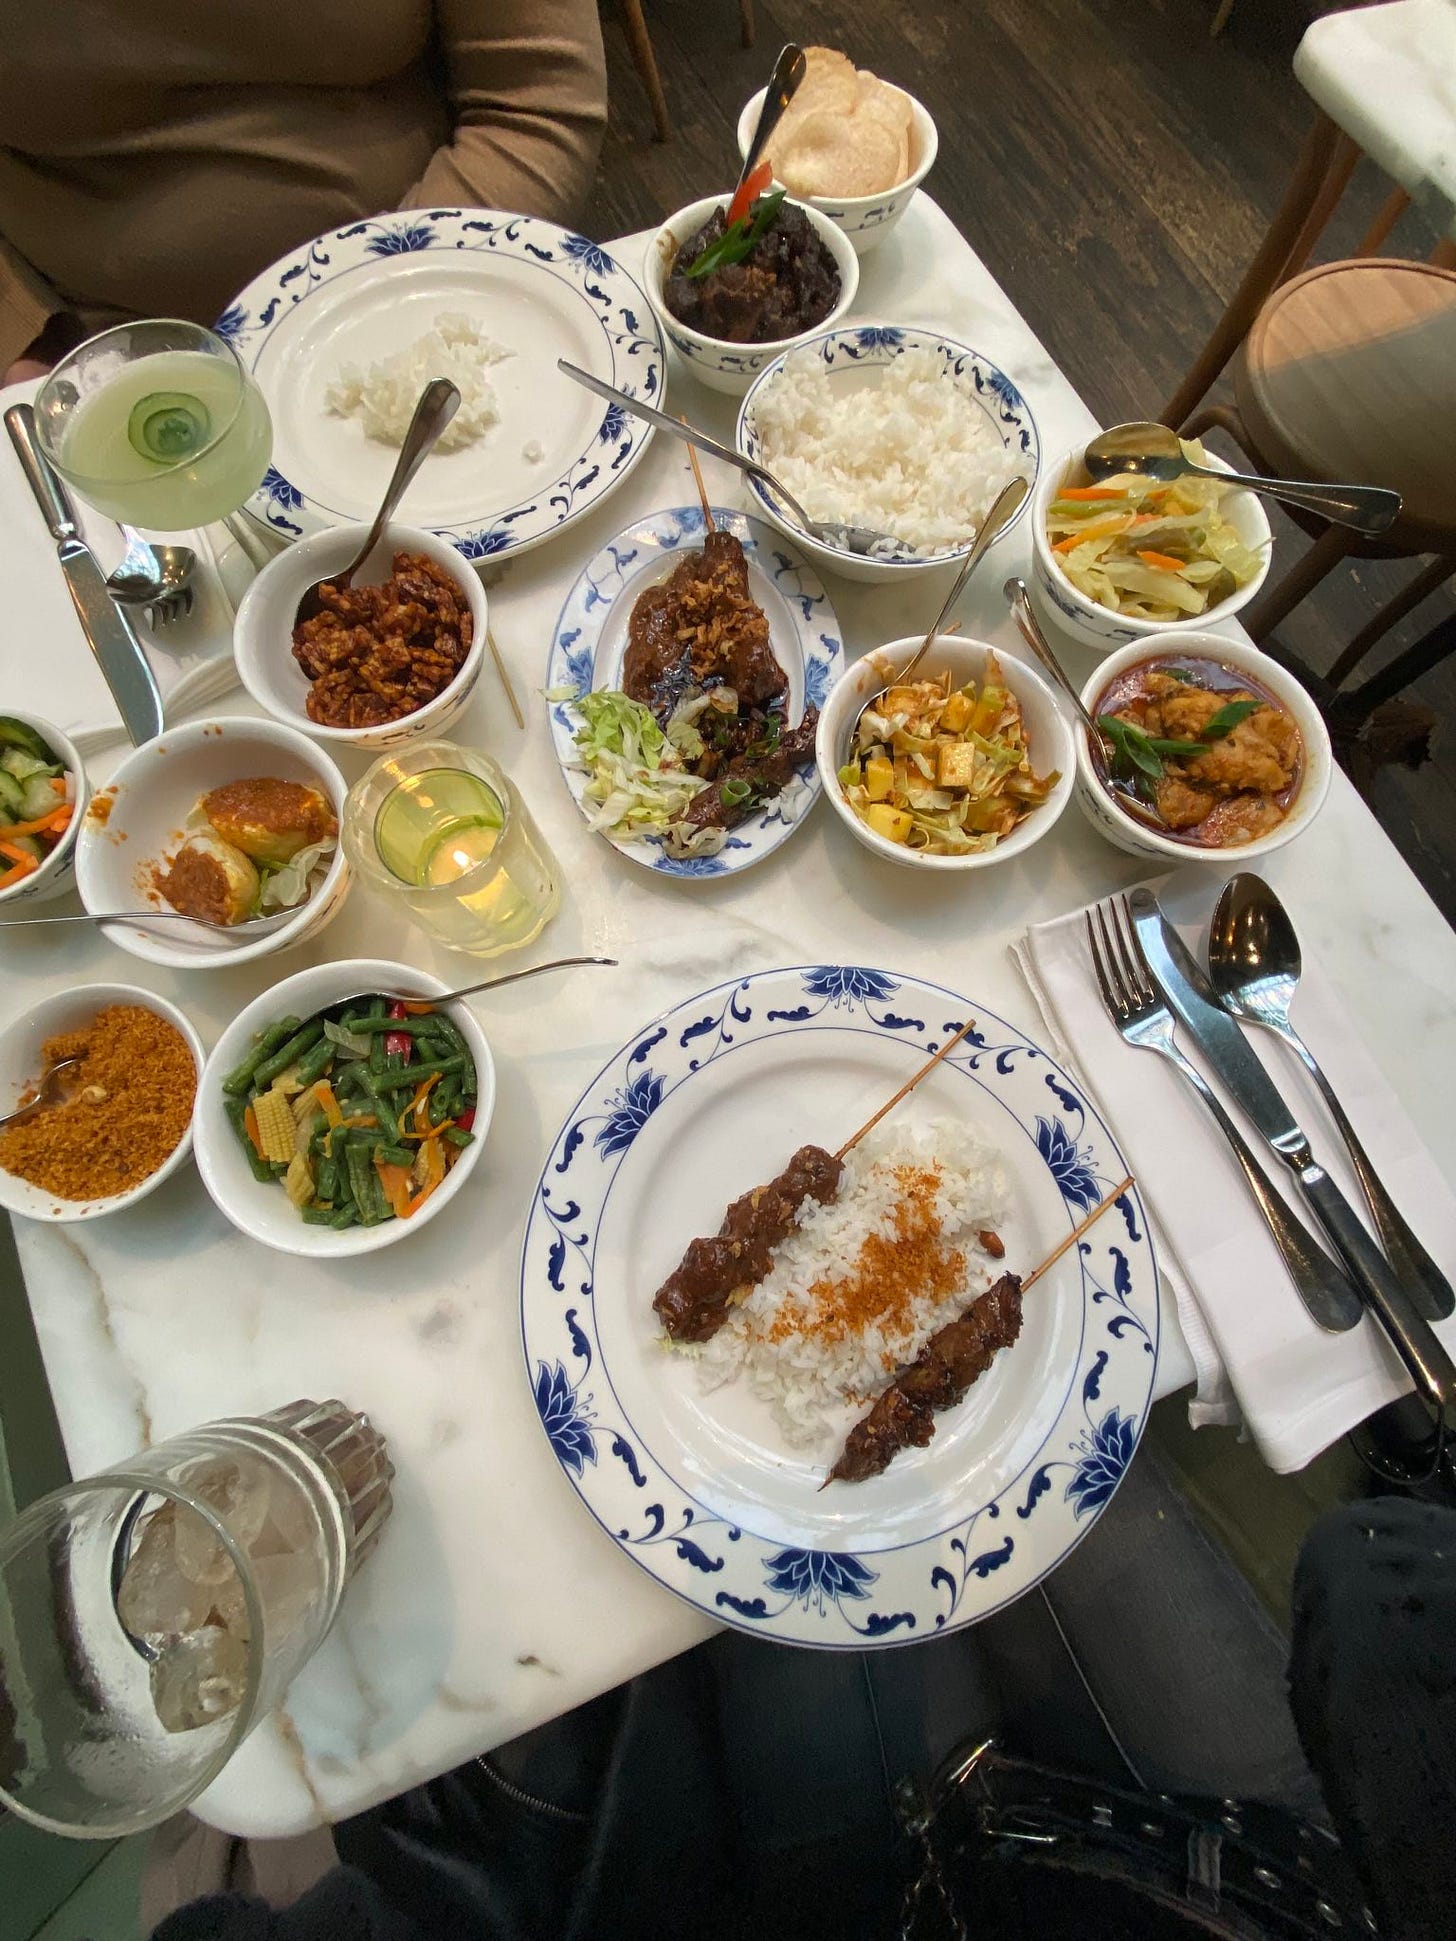 Photograph of a table of small dishes of food with a medium bowl of rice.